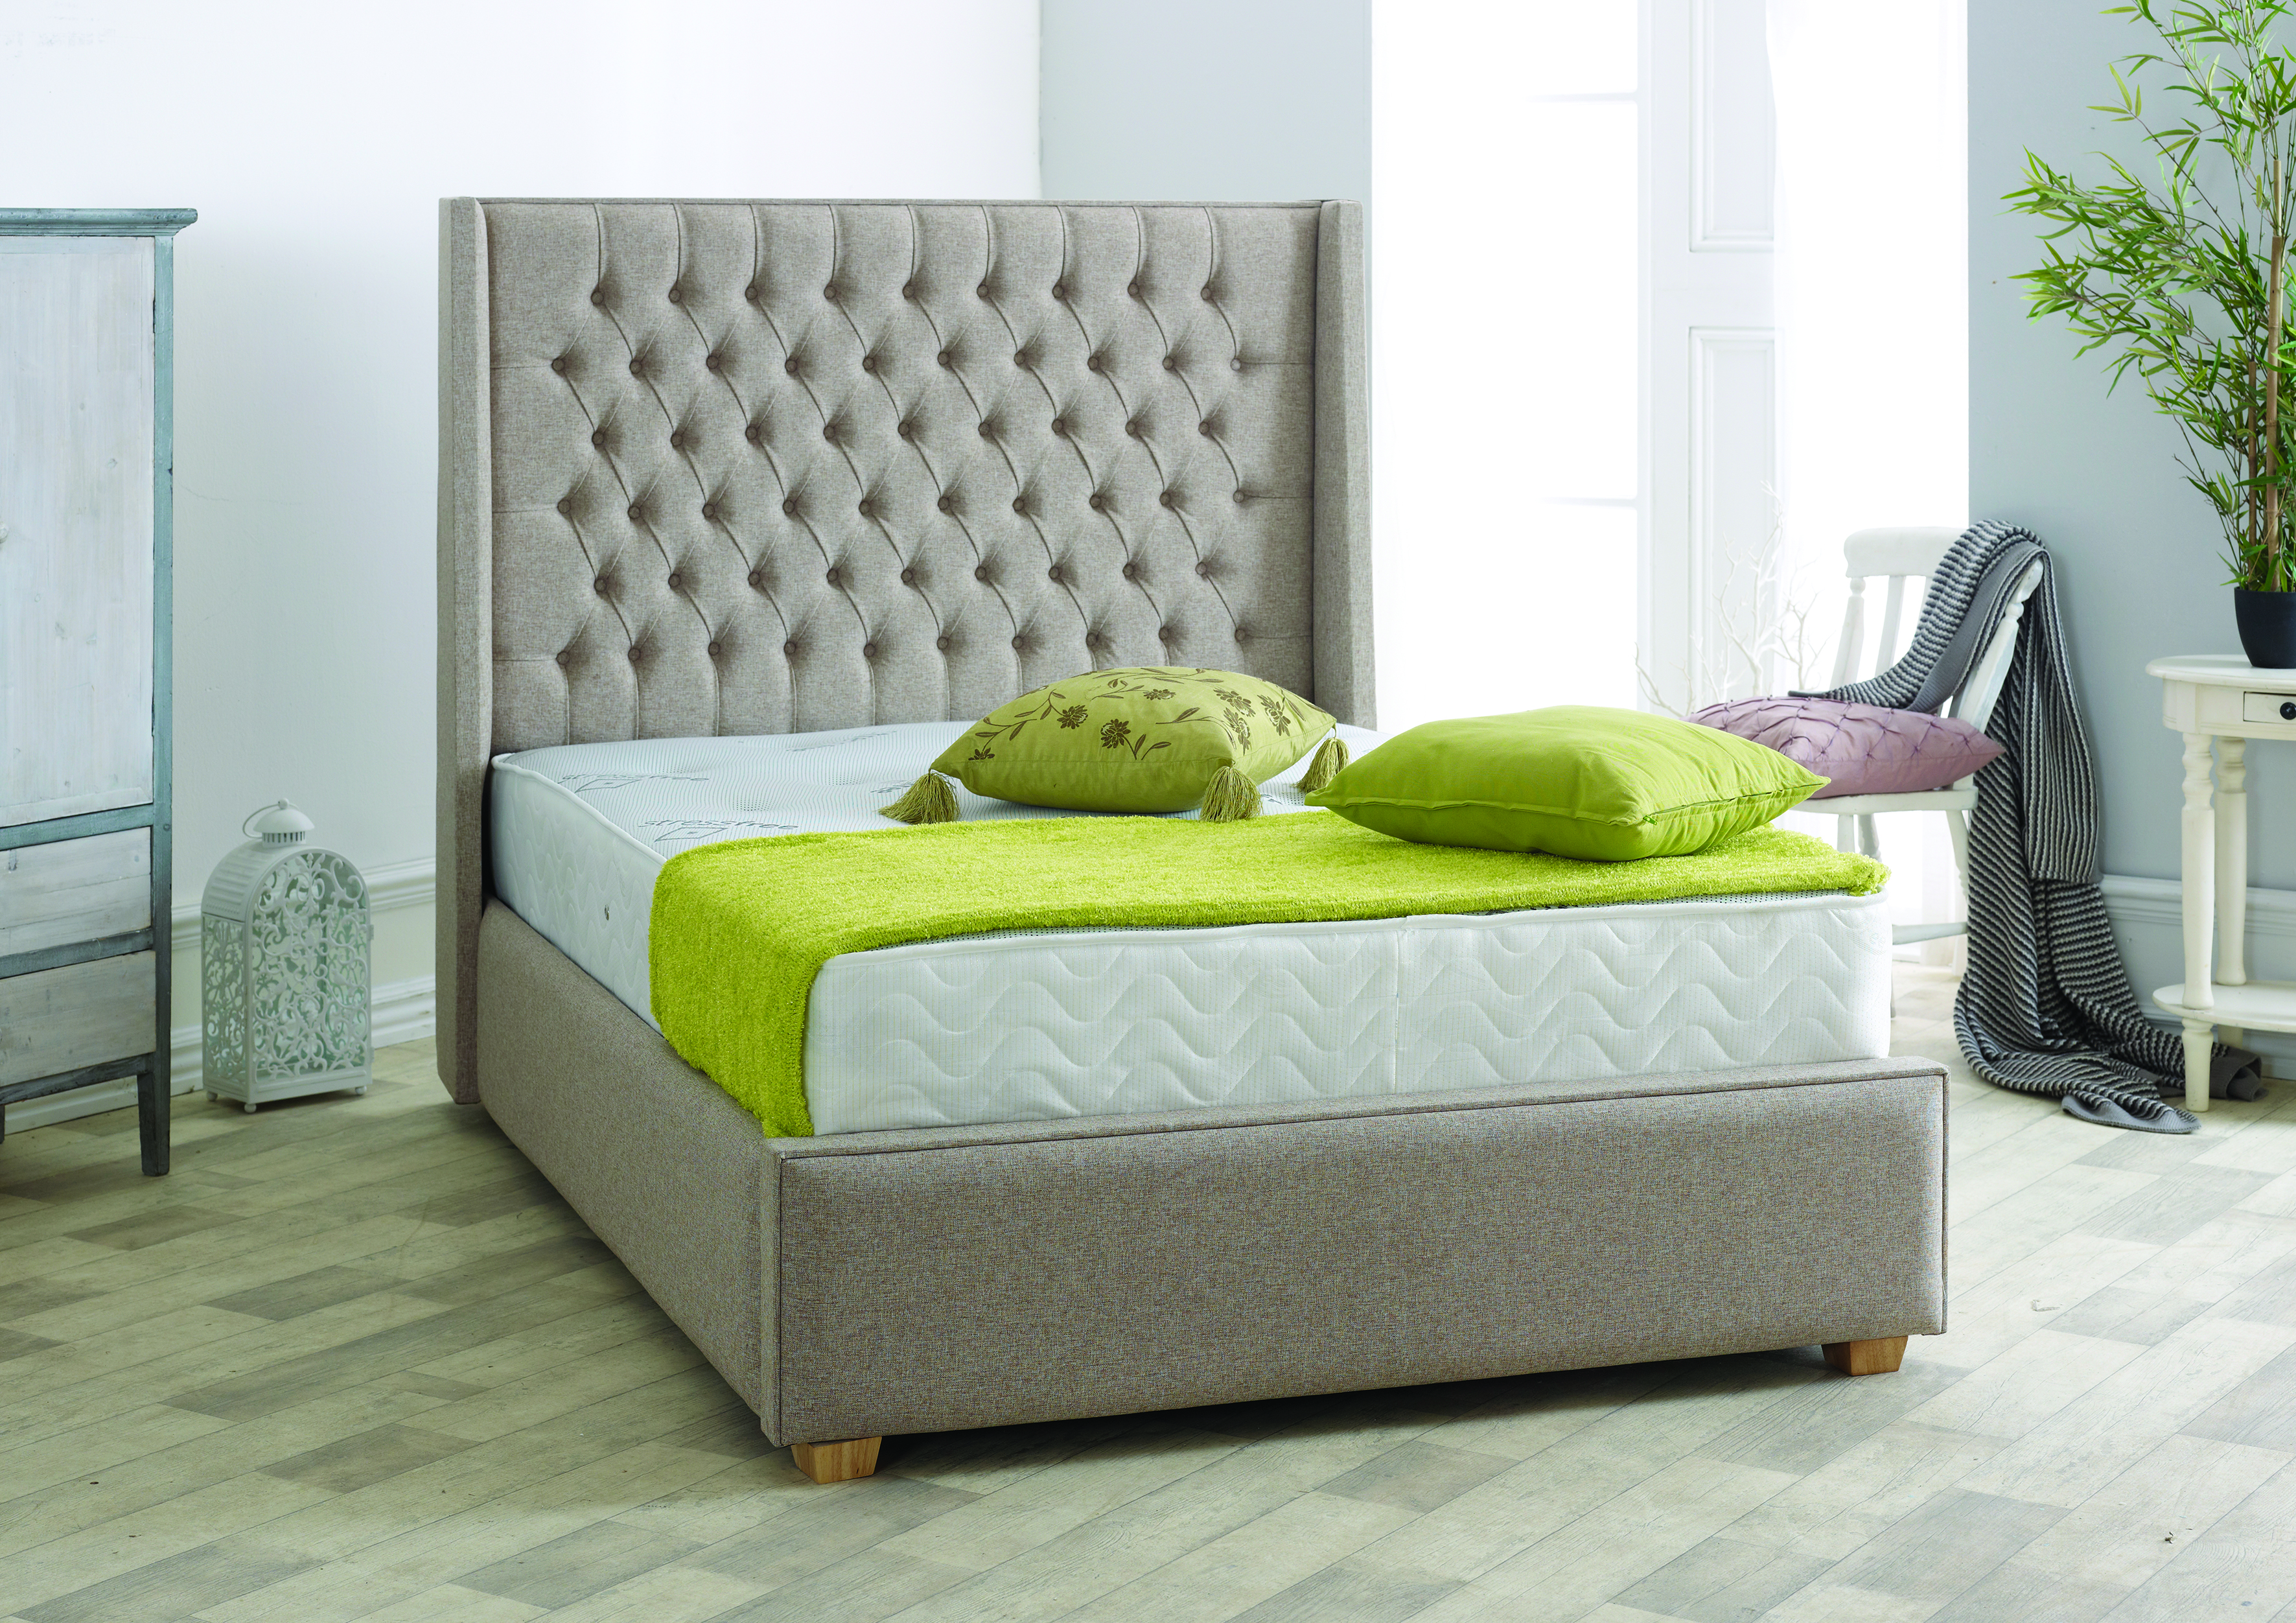 Fabric Beds And Bed Frames Nottingham Quality Bed Warehouse